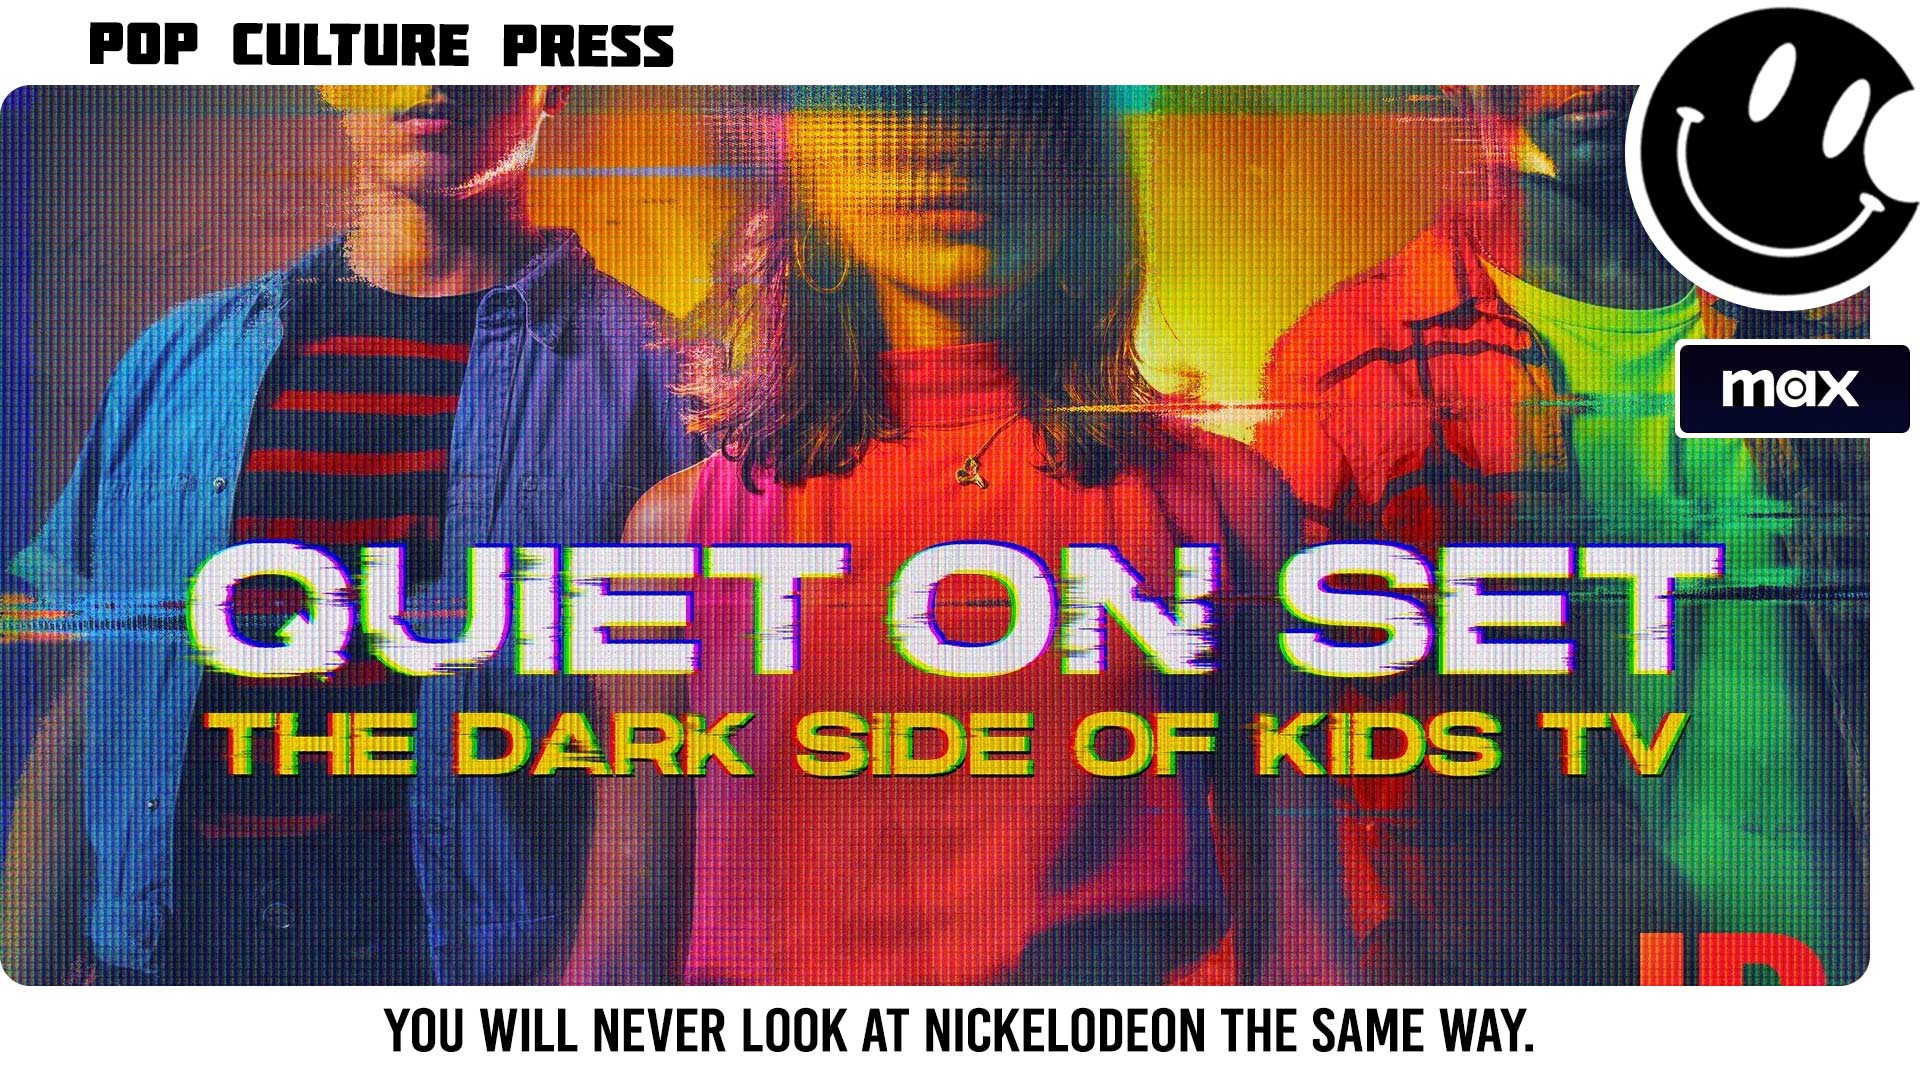 Quiet on the Set reveals horrors at Nickelodeon that were never truly dealt with. 